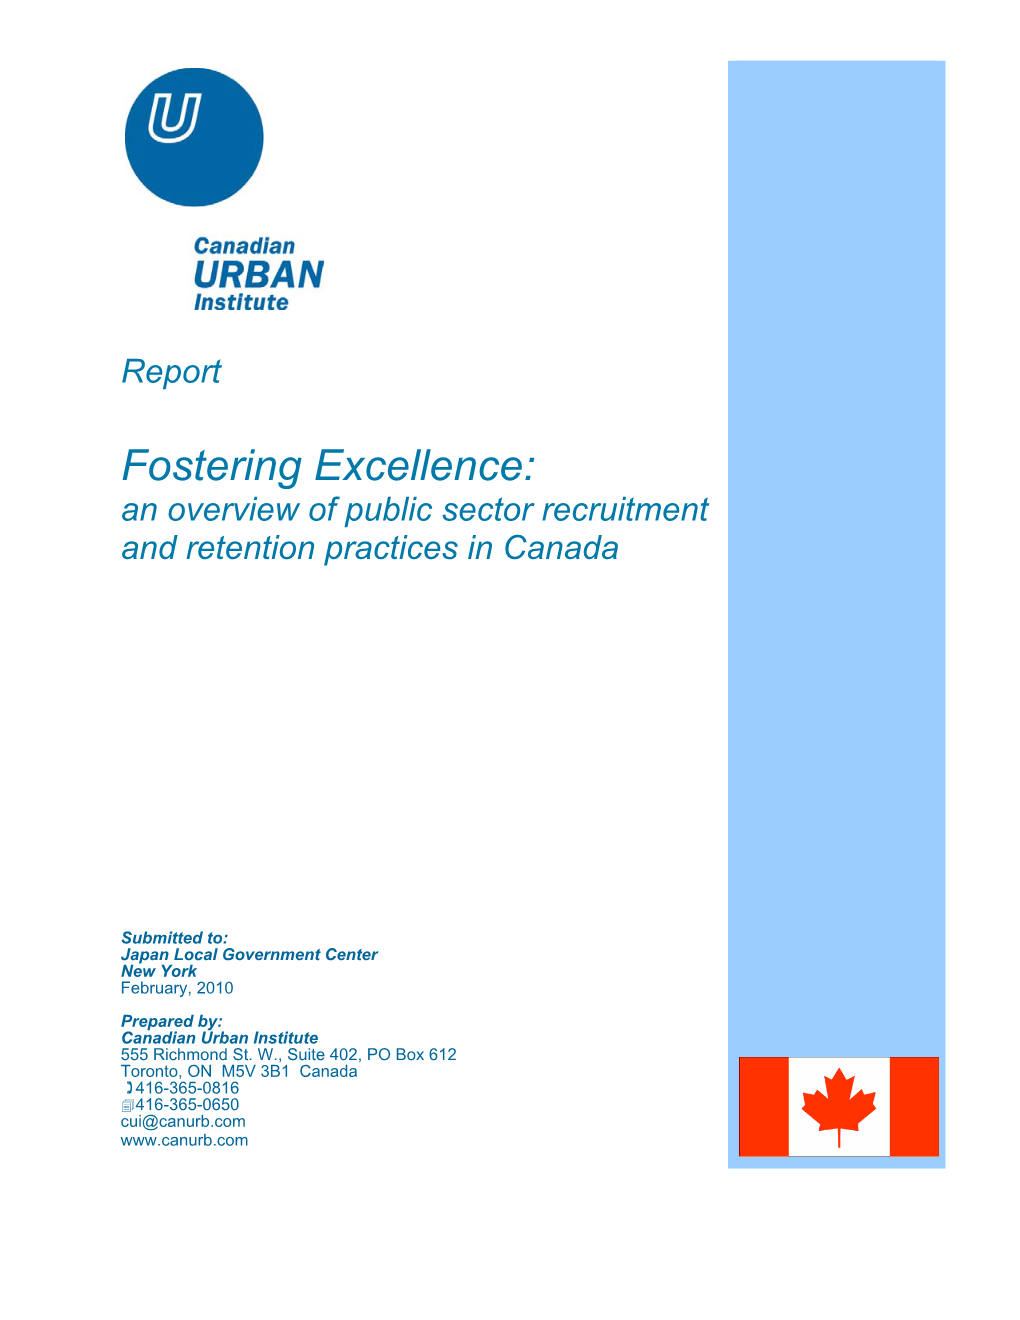 Fostering Excellence: an Overview of Public Sector Recruitment and Retention Practices in Canada